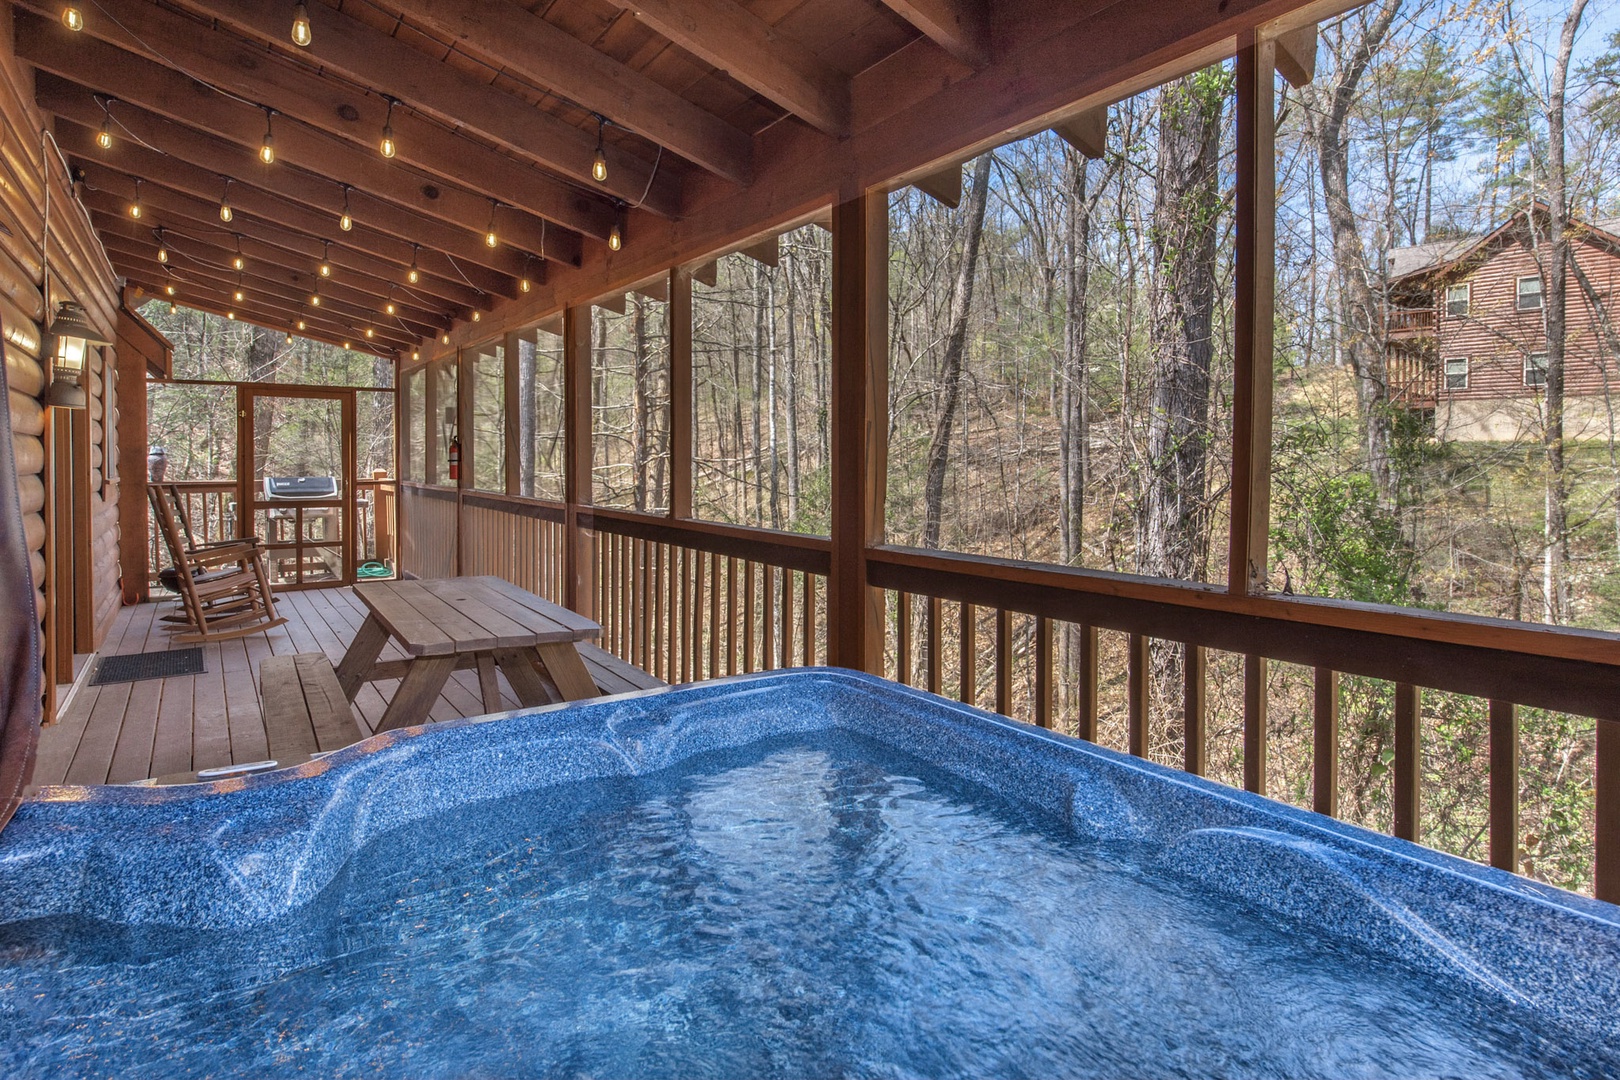 Private hot tub on deck